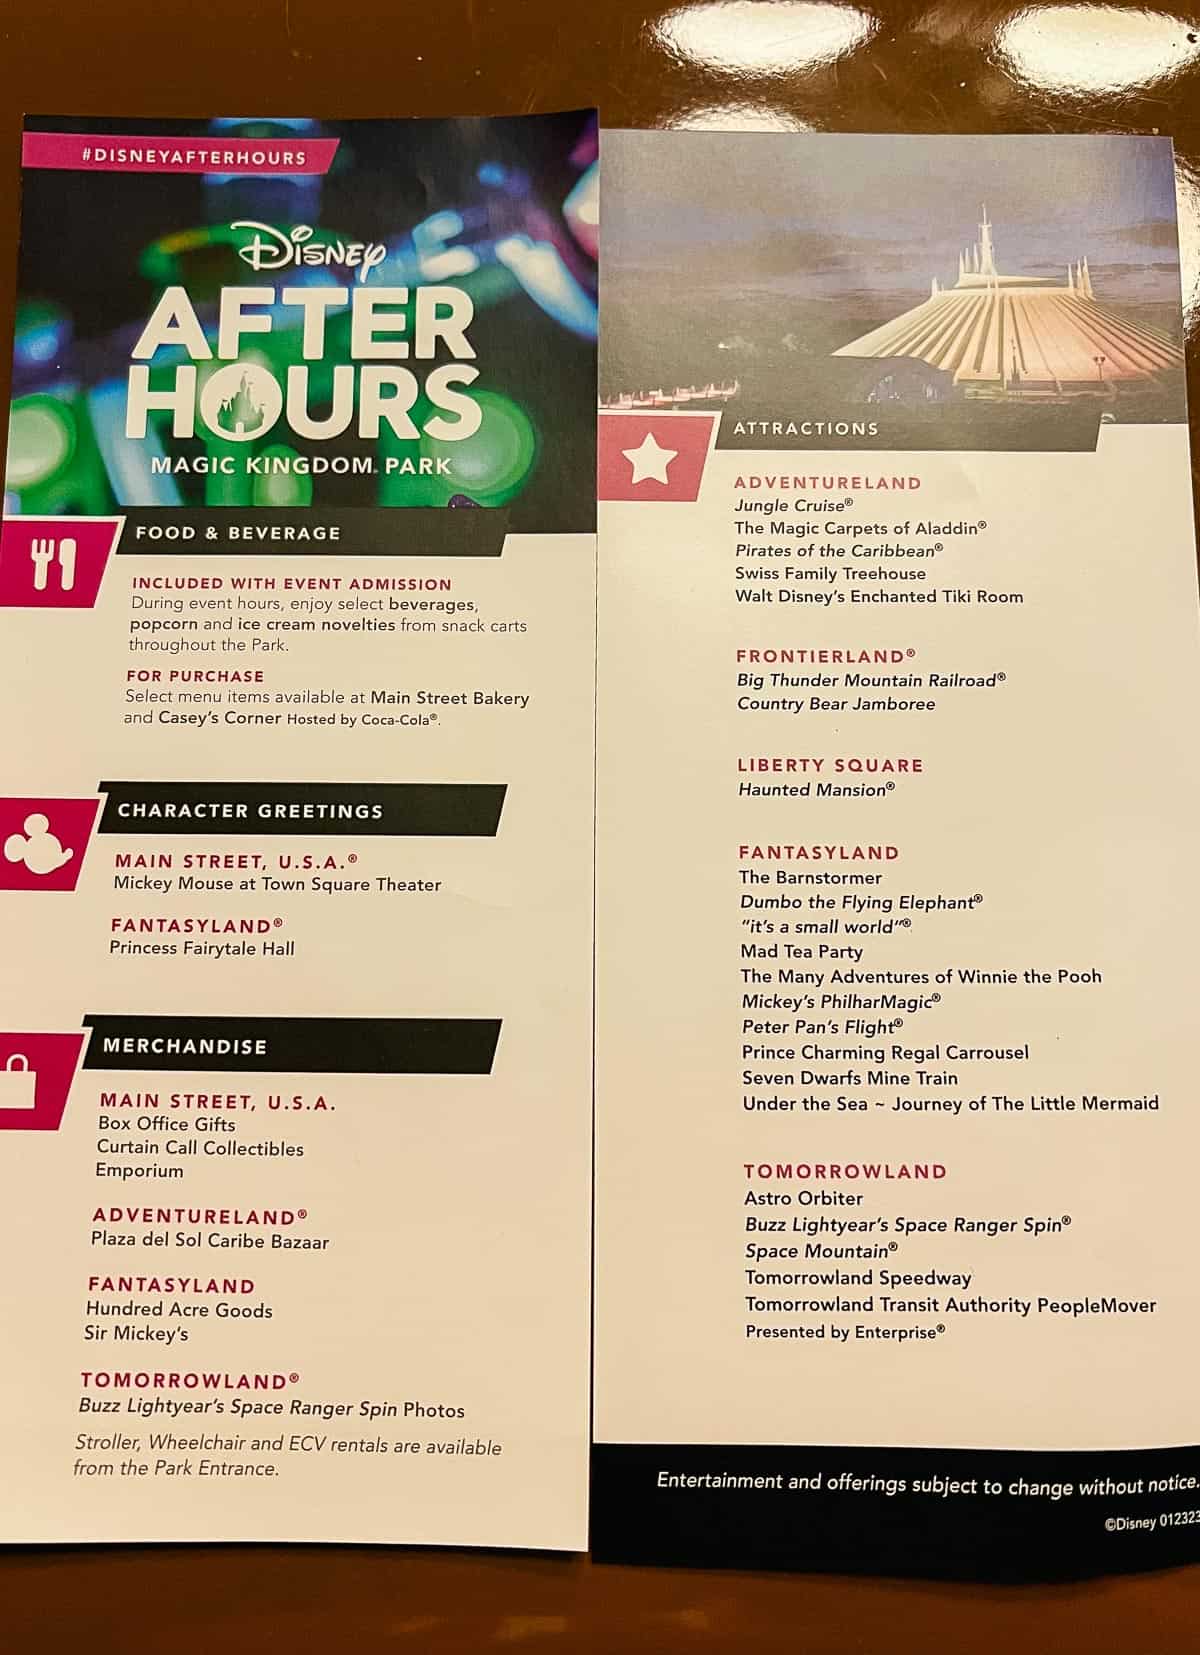 The event guide that lists attractions available during Magic Kingdom After Hours. 